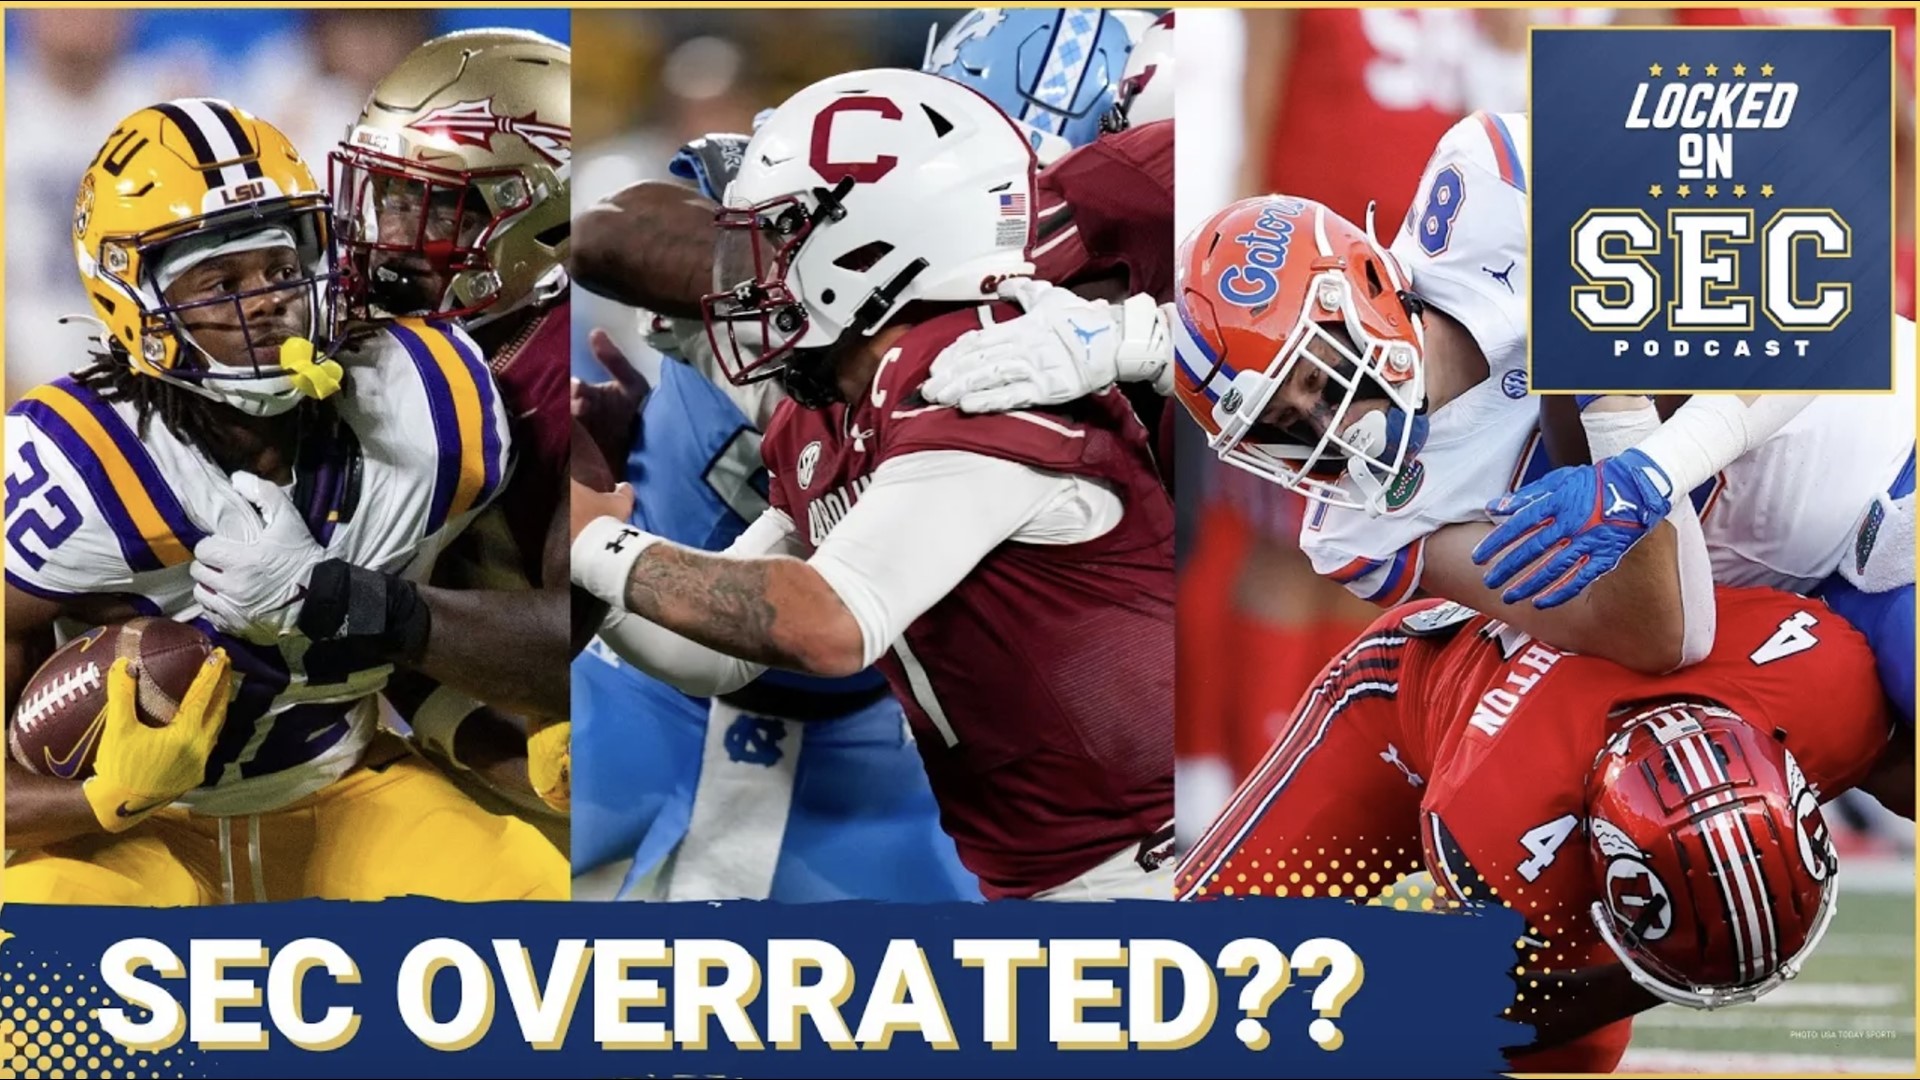 Is the SEC overrated this season? What do LSU, Florida and South Carolina's losses mean so far? How does the SEC stack up against other conferences so far?